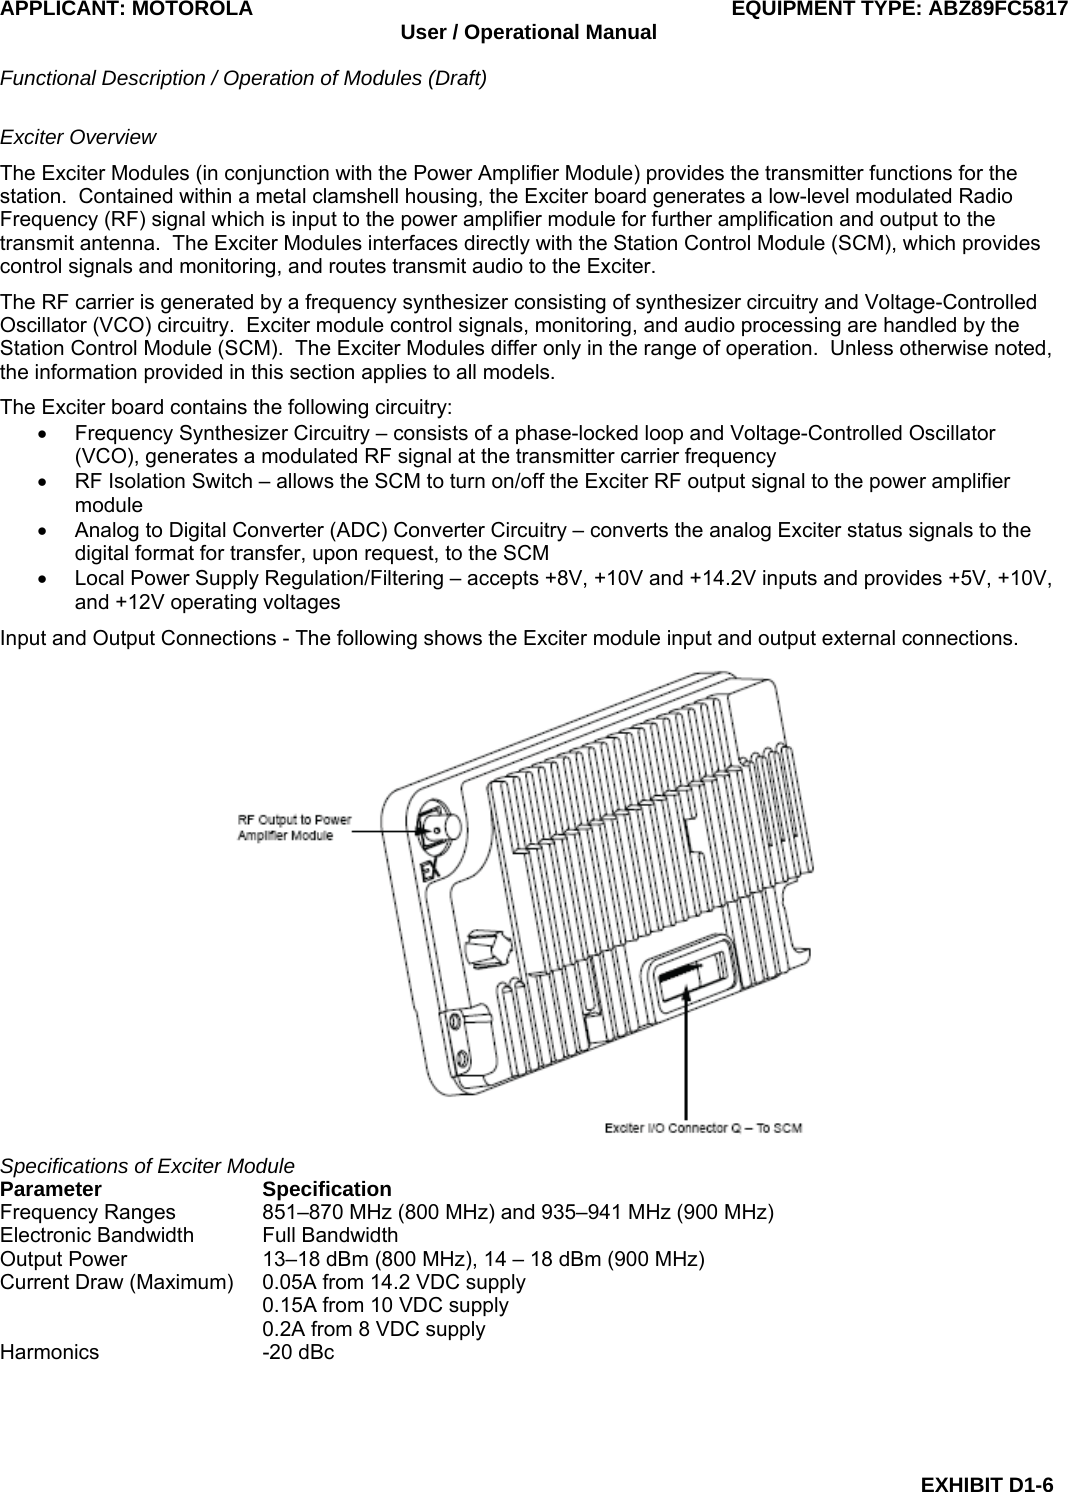 APPLICANT: MOTOROLA  EQUIPMENT TYPE: ABZ89FC5817 User / Operational Manual  Functional Description / Operation of Modules (Draft)  EXHIBIT D1-6 Exciter Overview The Exciter Modules (in conjunction with the Power Amplifier Module) provides the transmitter functions for the station.  Contained within a metal clamshell housing, the Exciter board generates a low-level modulated Radio Frequency (RF) signal which is input to the power amplifier module for further amplification and output to the transmit antenna.  The Exciter Modules interfaces directly with the Station Control Module (SCM), which provides control signals and monitoring, and routes transmit audio to the Exciter. The RF carrier is generated by a frequency synthesizer consisting of synthesizer circuitry and Voltage-Controlled Oscillator (VCO) circuitry.  Exciter module control signals, monitoring, and audio processing are handled by the Station Control Module (SCM).  The Exciter Modules differ only in the range of operation.  Unless otherwise noted, the information provided in this section applies to all models. The Exciter board contains the following circuitry: •  Frequency Synthesizer Circuitry – consists of a phase-locked loop and Voltage-Controlled Oscillator (VCO), generates a modulated RF signal at the transmitter carrier frequency •  RF Isolation Switch – allows the SCM to turn on/off the Exciter RF output signal to the power amplifier module •  Analog to Digital Converter (ADC) Converter Circuitry – converts the analog Exciter status signals to the digital format for transfer, upon request, to the SCM •  Local Power Supply Regulation/Filtering – accepts +8V, +10V and +14.2V inputs and provides +5V, +10V, and +12V operating voltages Input and Output Connections - The following shows the Exciter module input and output external connections.  Specifications of Exciter Module Parameter Specification Frequency Ranges  851–870 MHz (800 MHz) and 935–941 MHz (900 MHz) Electronic Bandwidth  Full Bandwidth Output Power  13–18 dBm (800 MHz), 14 – 18 dBm (900 MHz) Current Draw (Maximum)  0.05A from 14.2 VDC supply   0.15A from 10 VDC supply   0.2A from 8 VDC supply Harmonics -20 dBc  